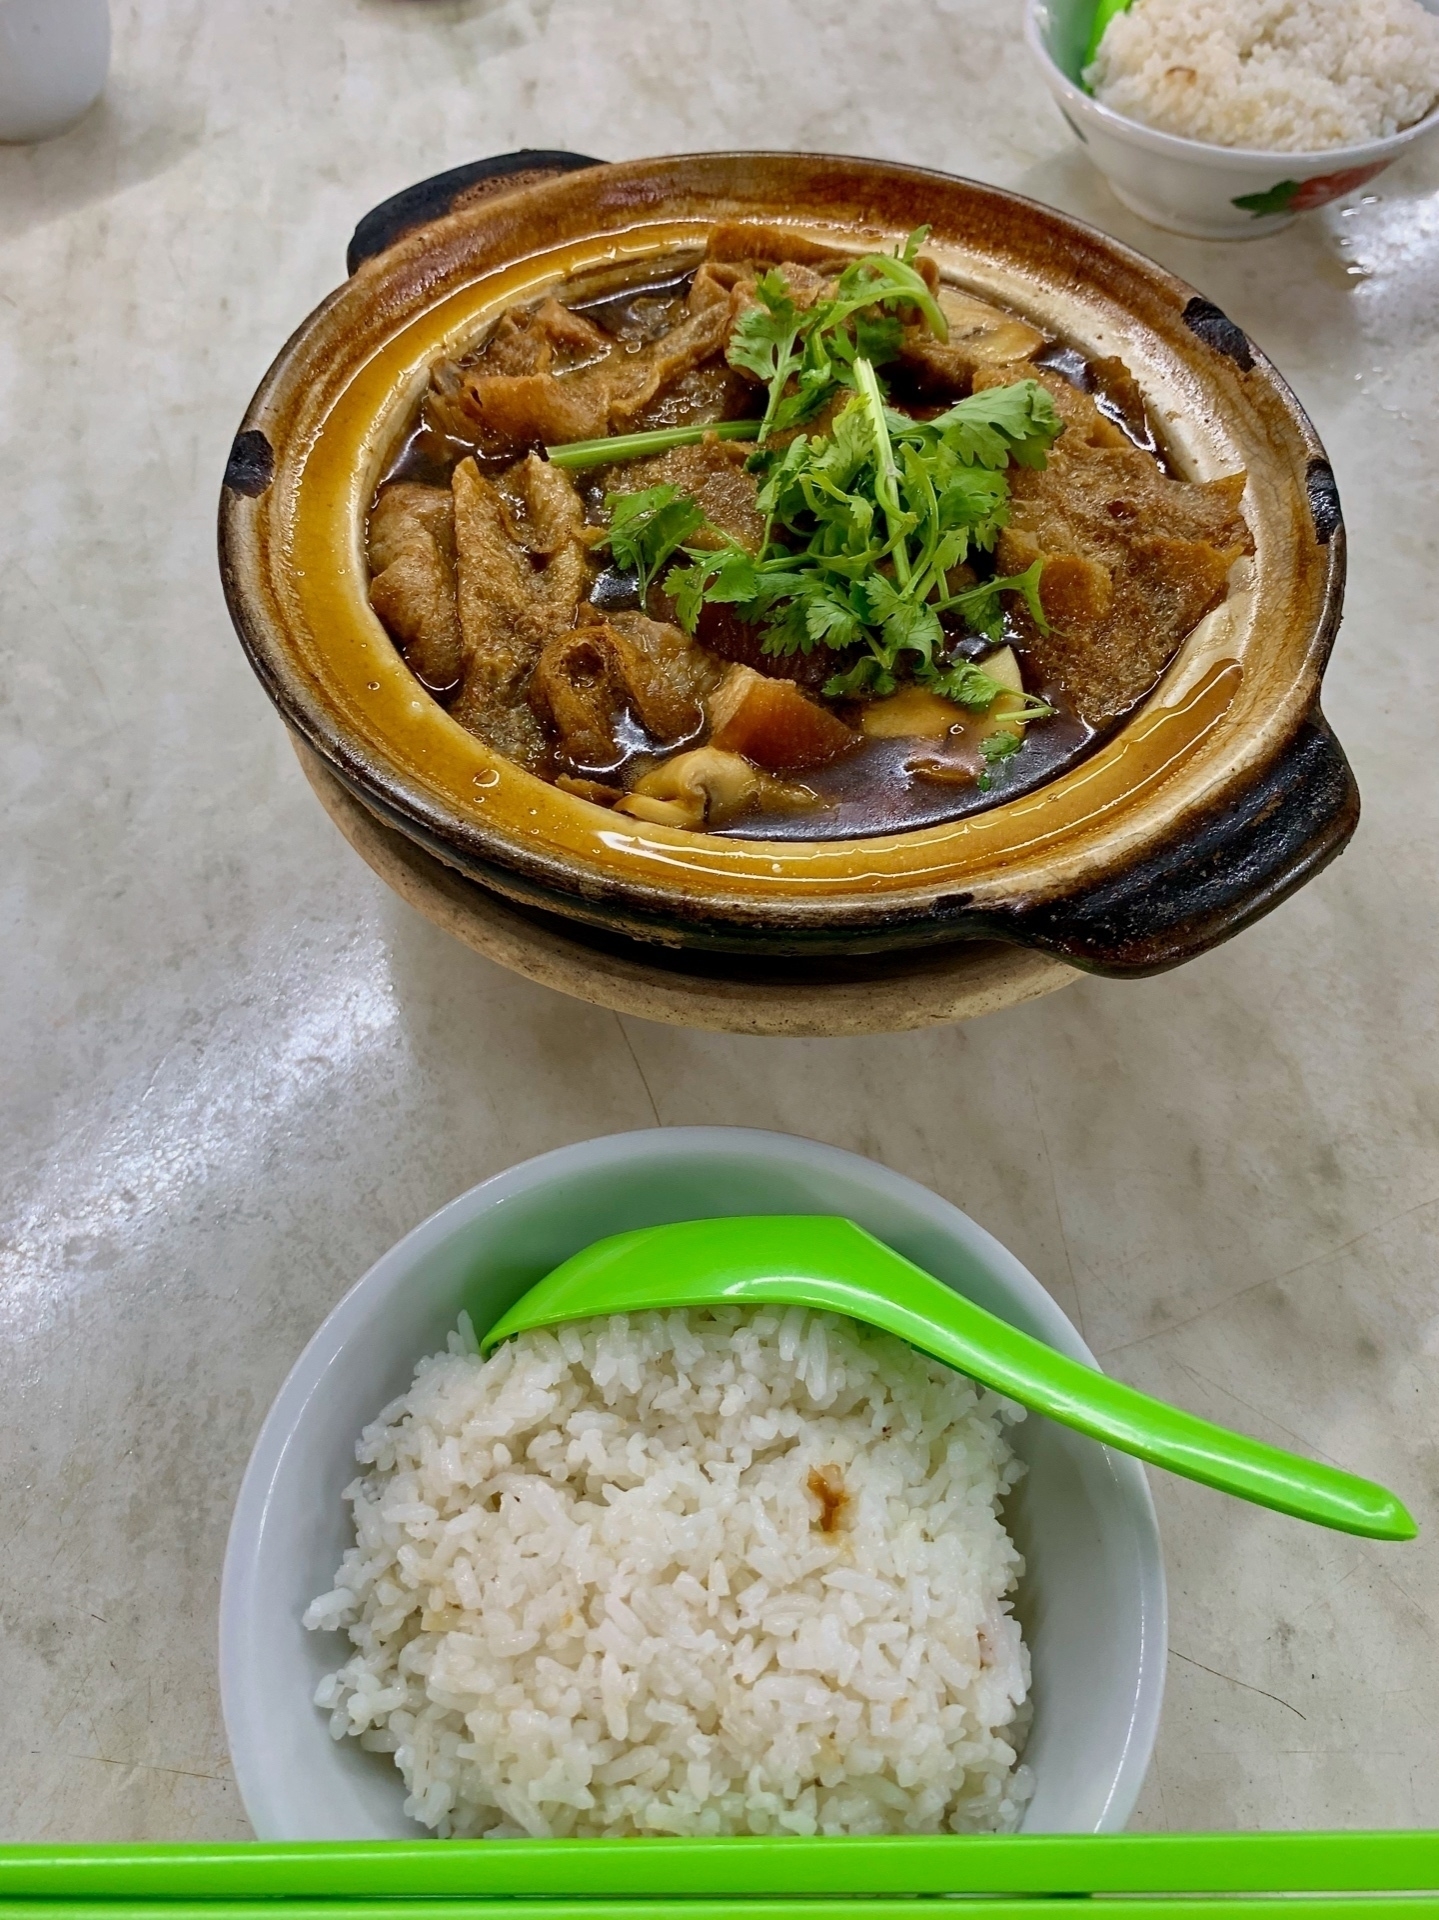 A claypot full of a pork broth dish called Bak kut teh, along with a bowl of plain rice